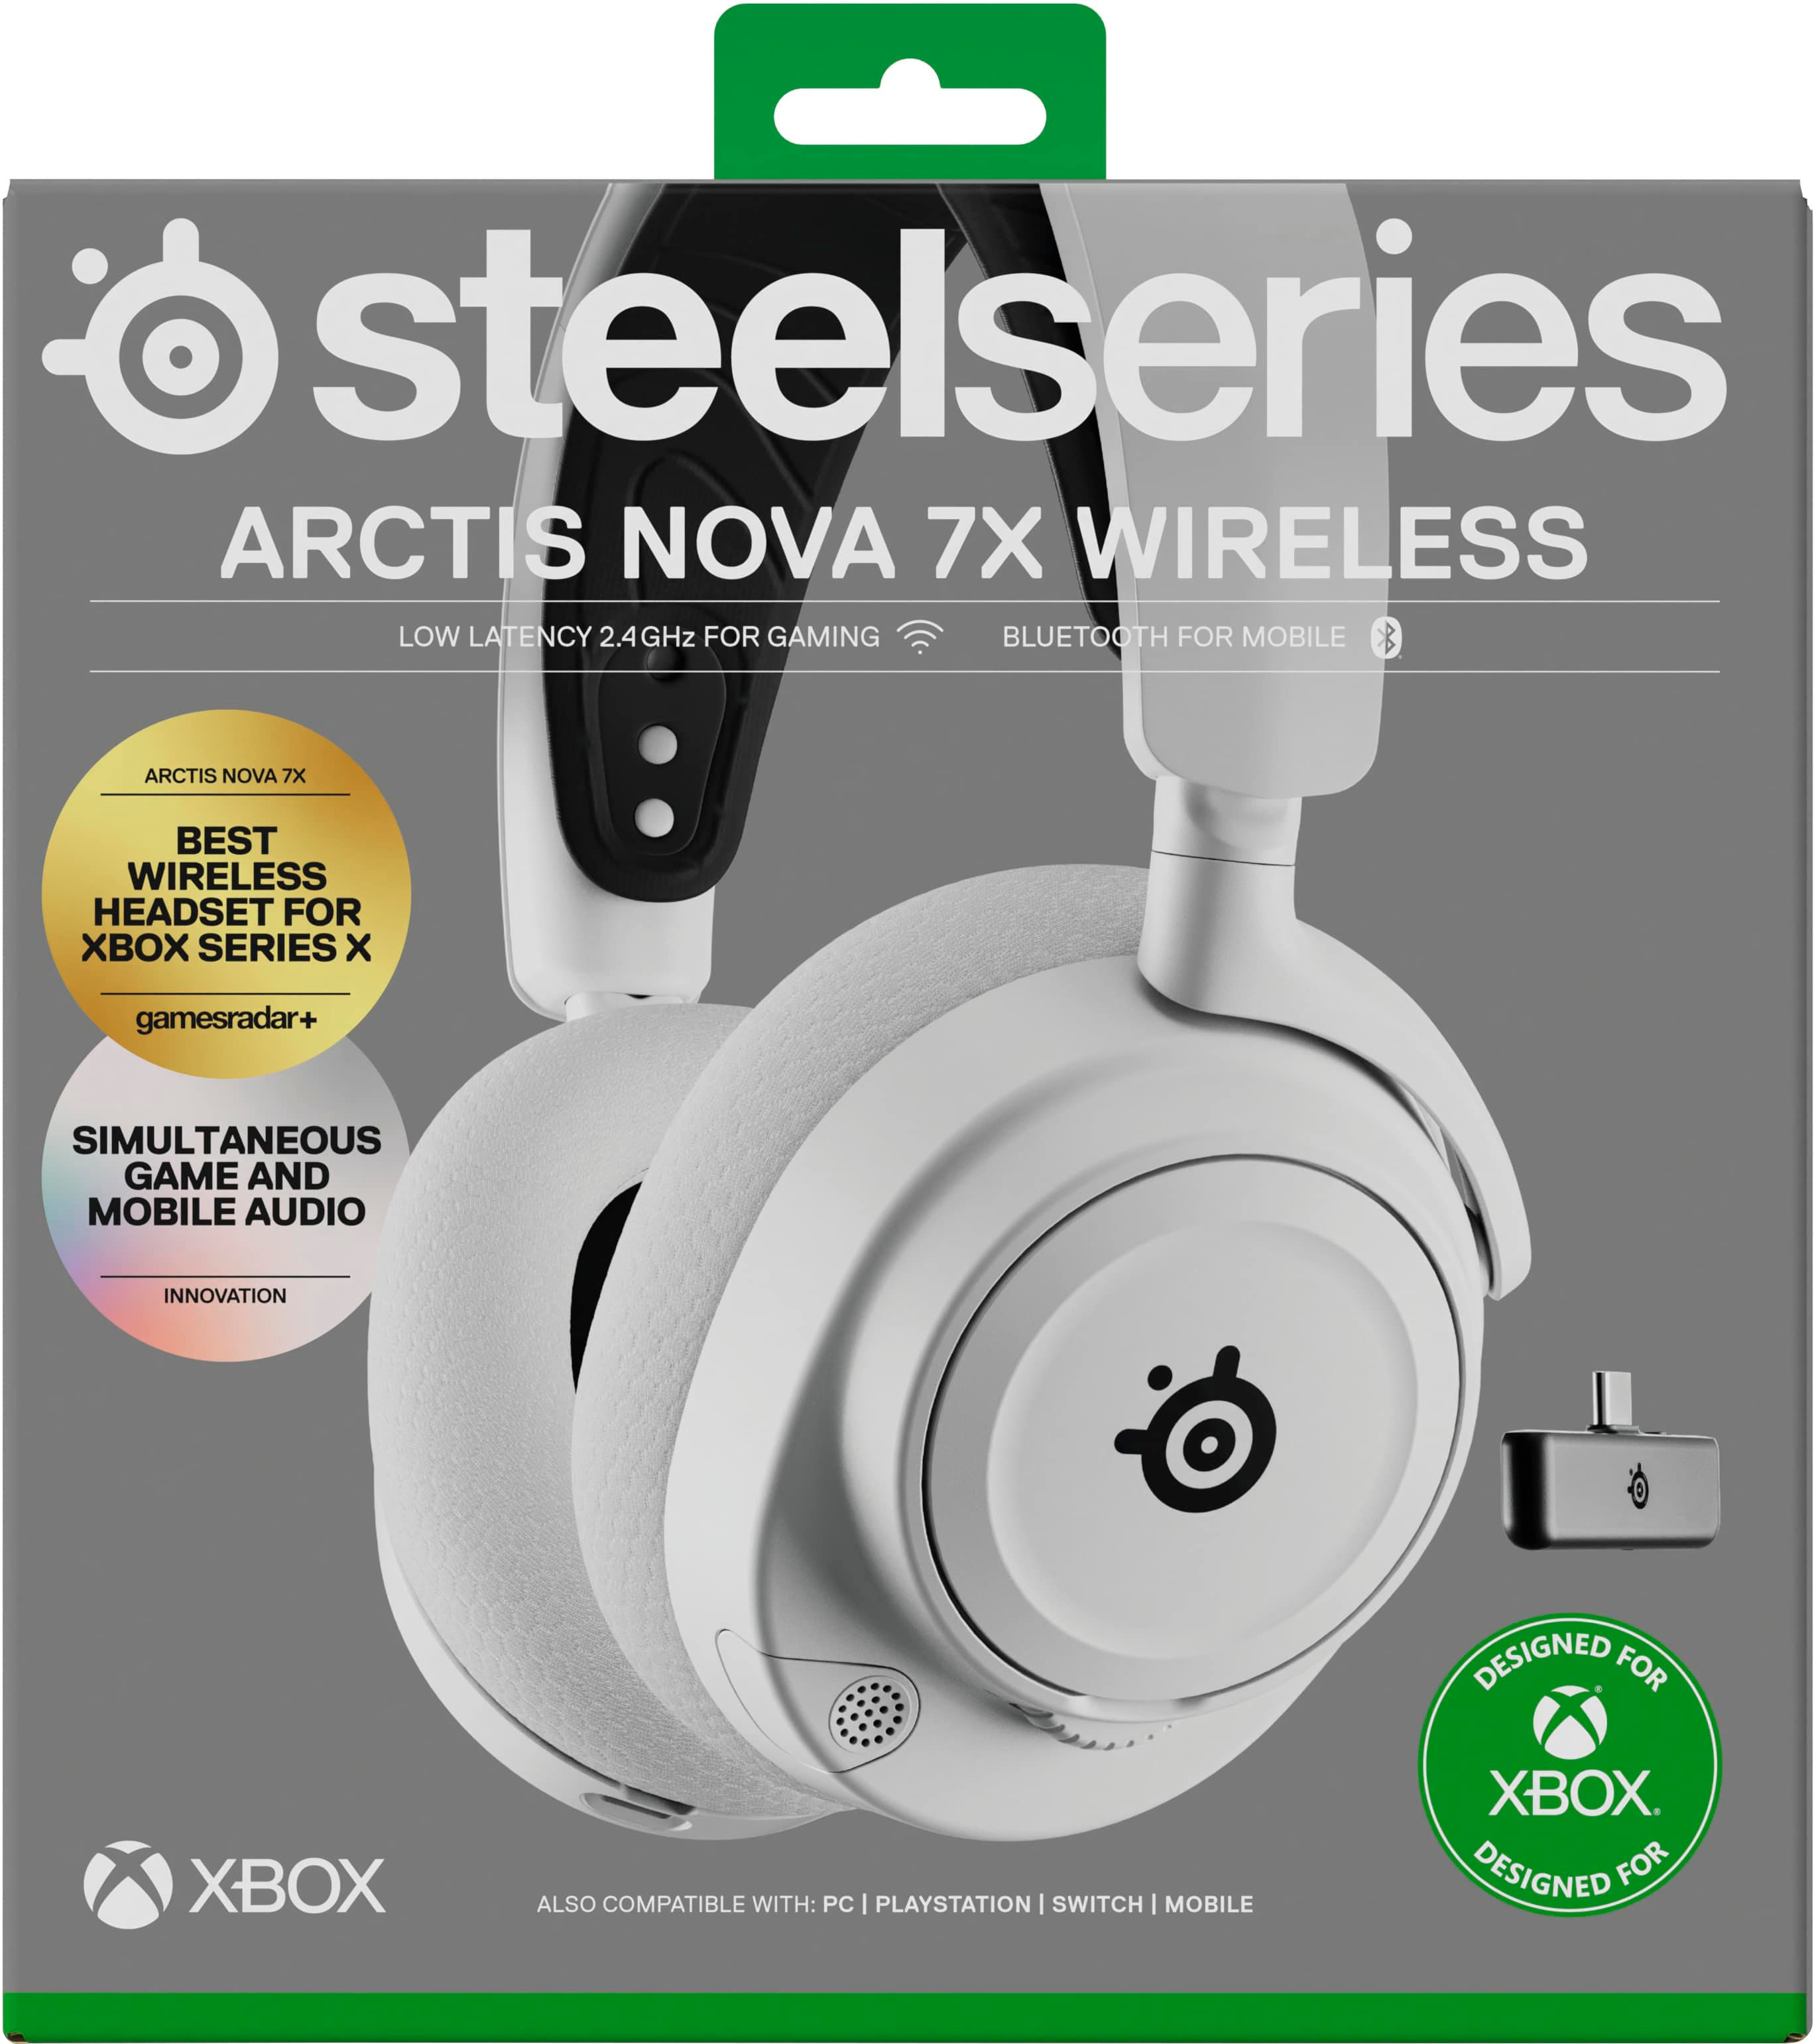 Steelseries Arctis 7X Review: My favorite Xbox Series X headset so far